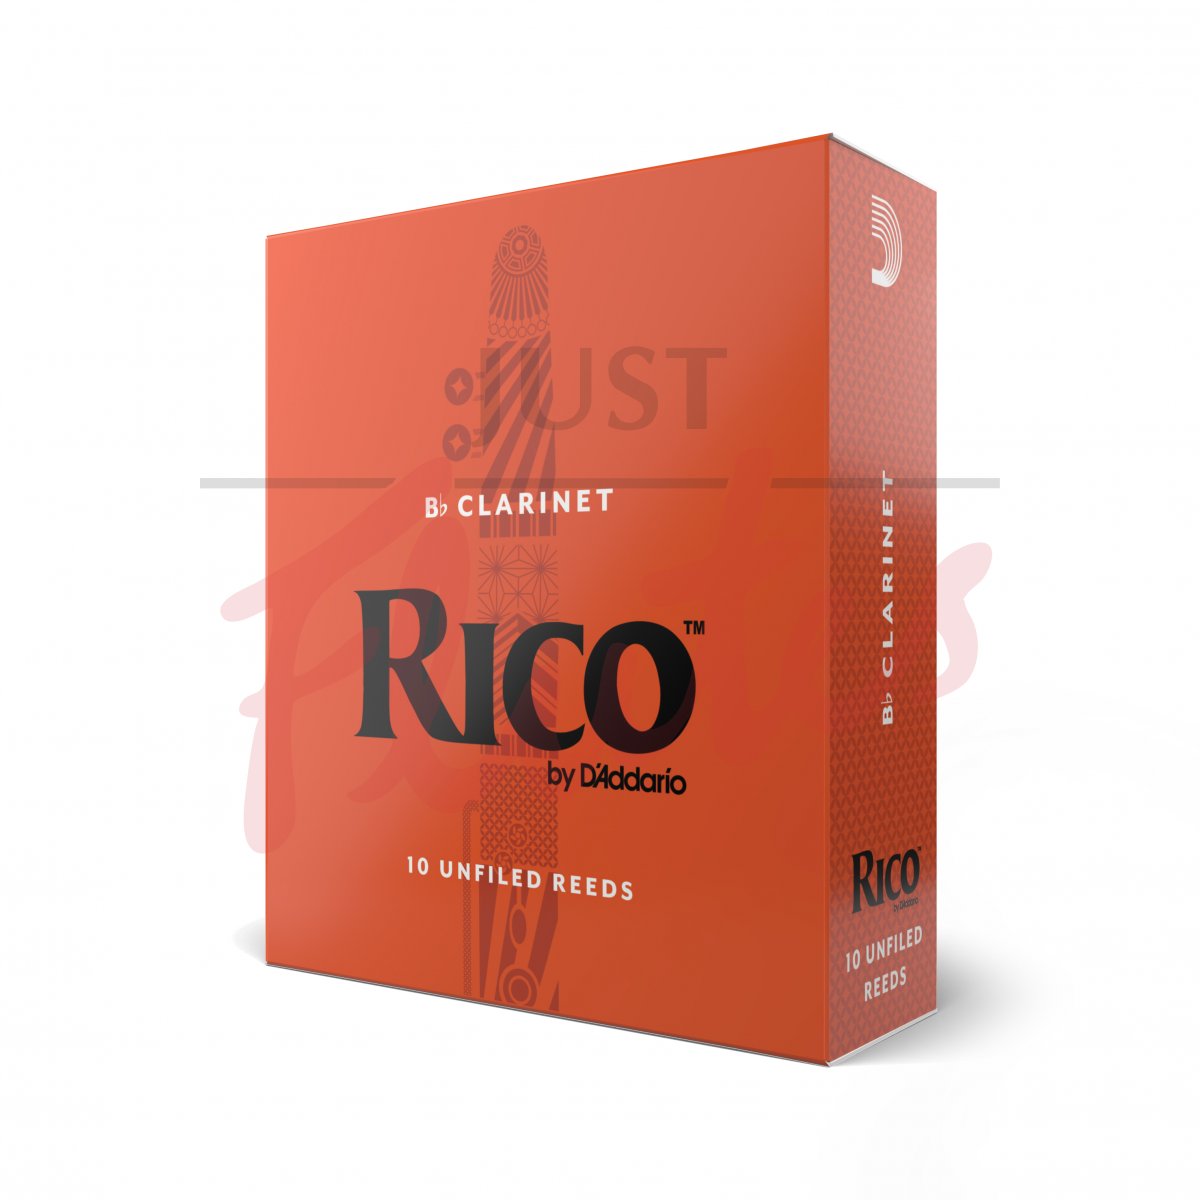 Rico by D'Addario RCA1025 Clarinet Reeds, 10-pack - Strength 2.5